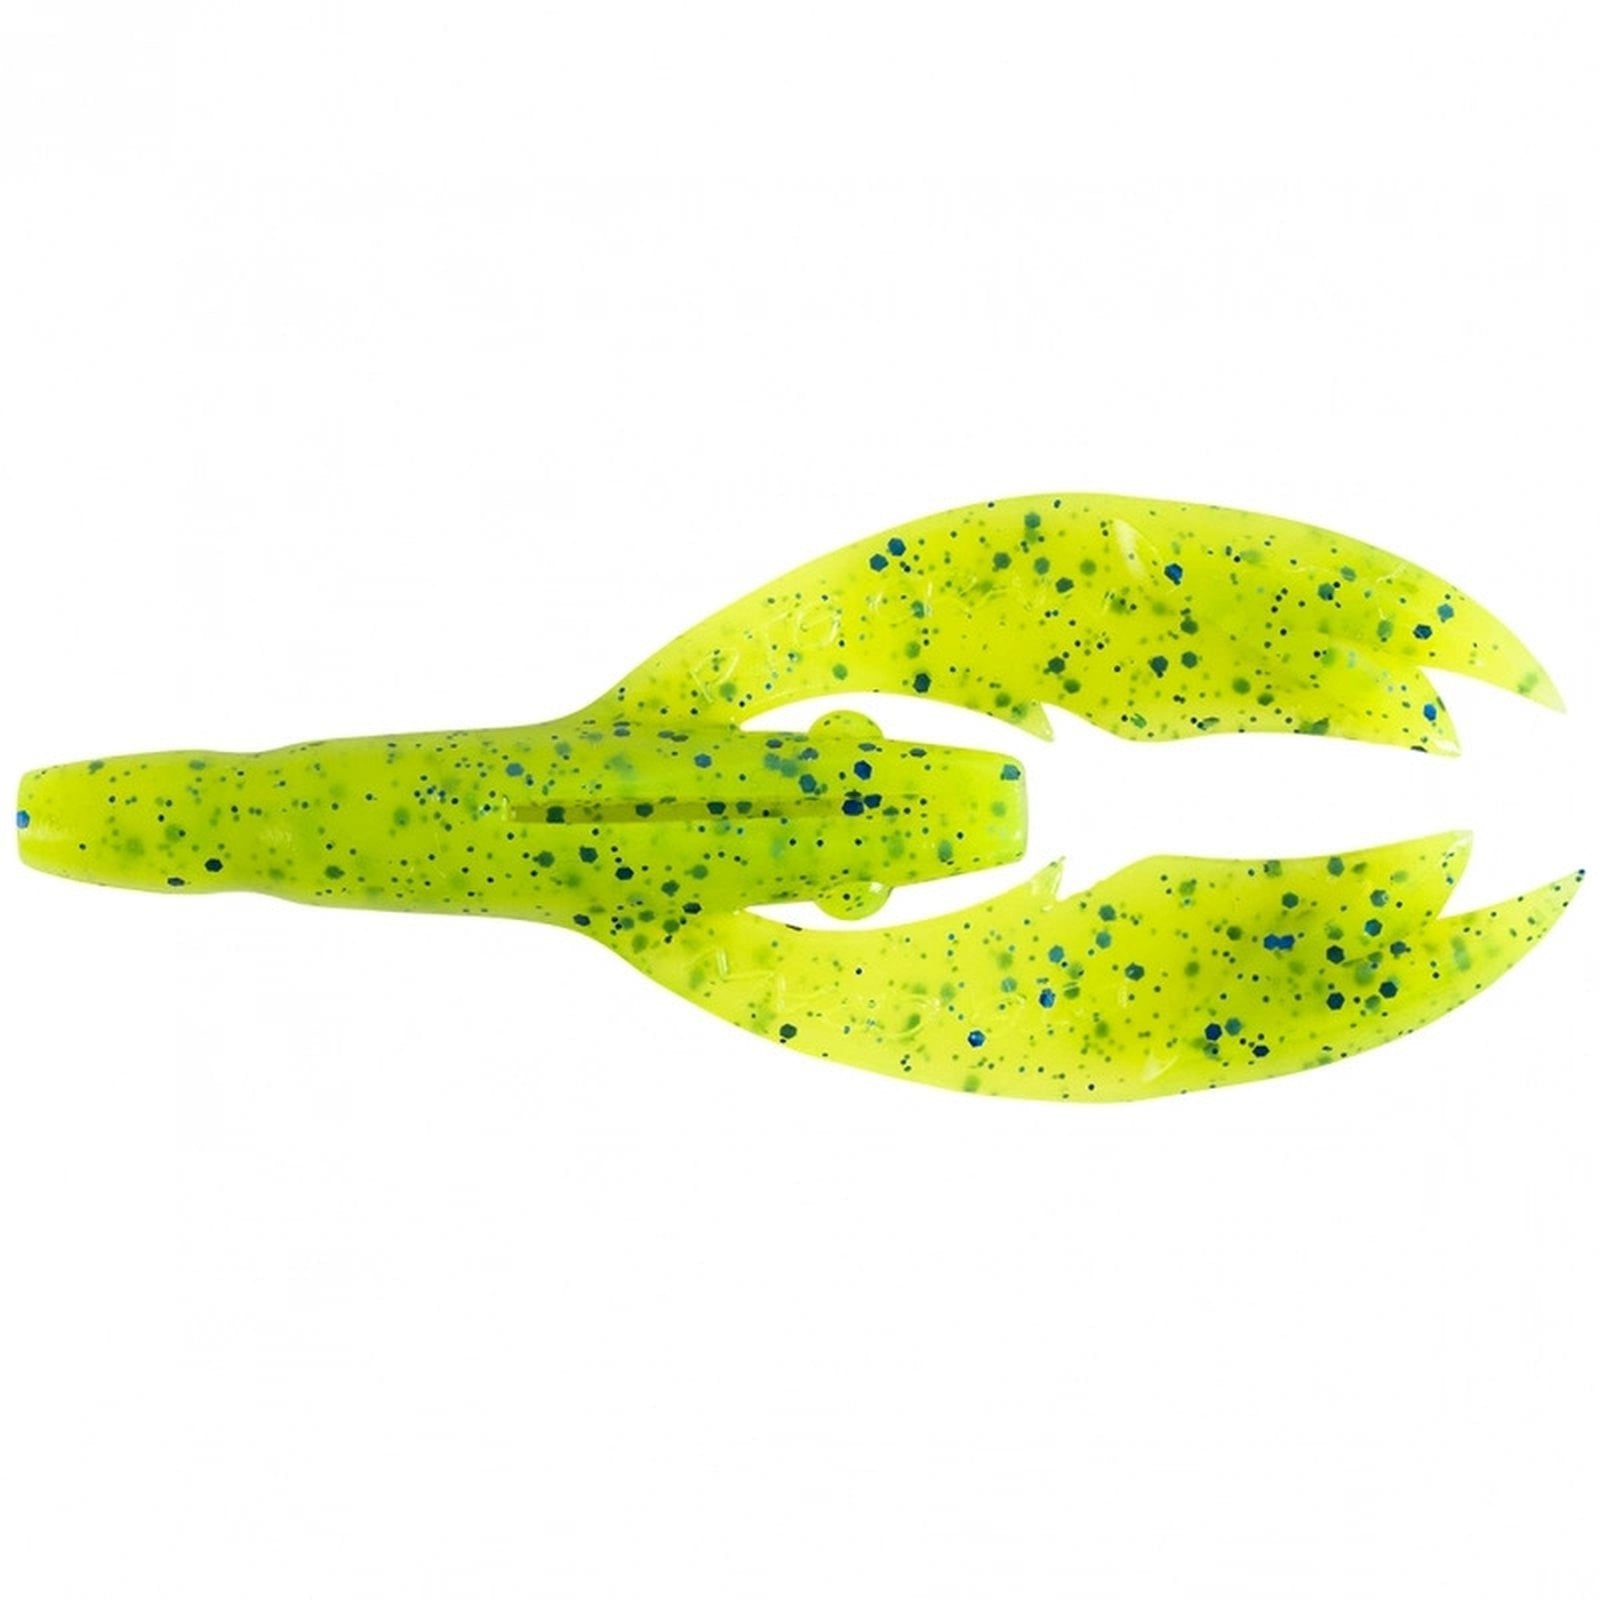 Strike Pro CWC Pig Craw C024 Funky Lime